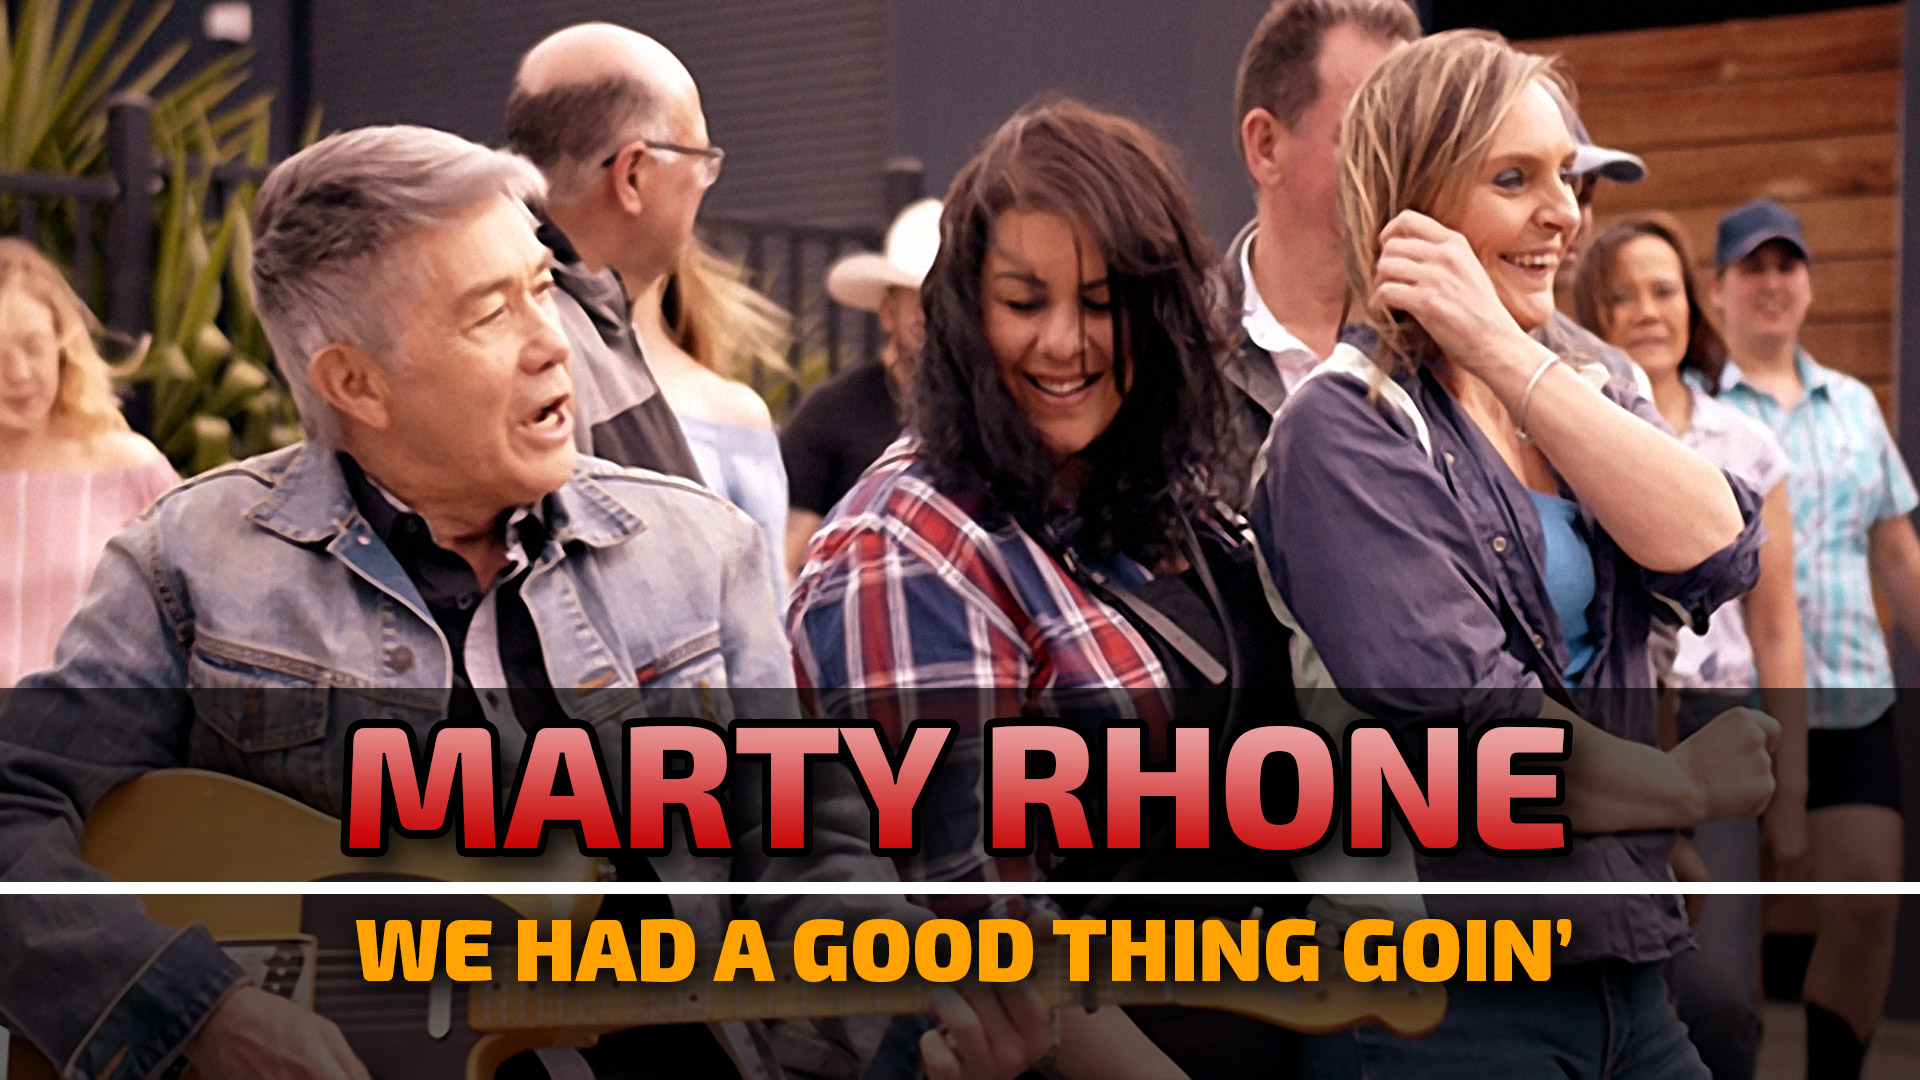 Marty Rhone We Had a Good Thing Goin'